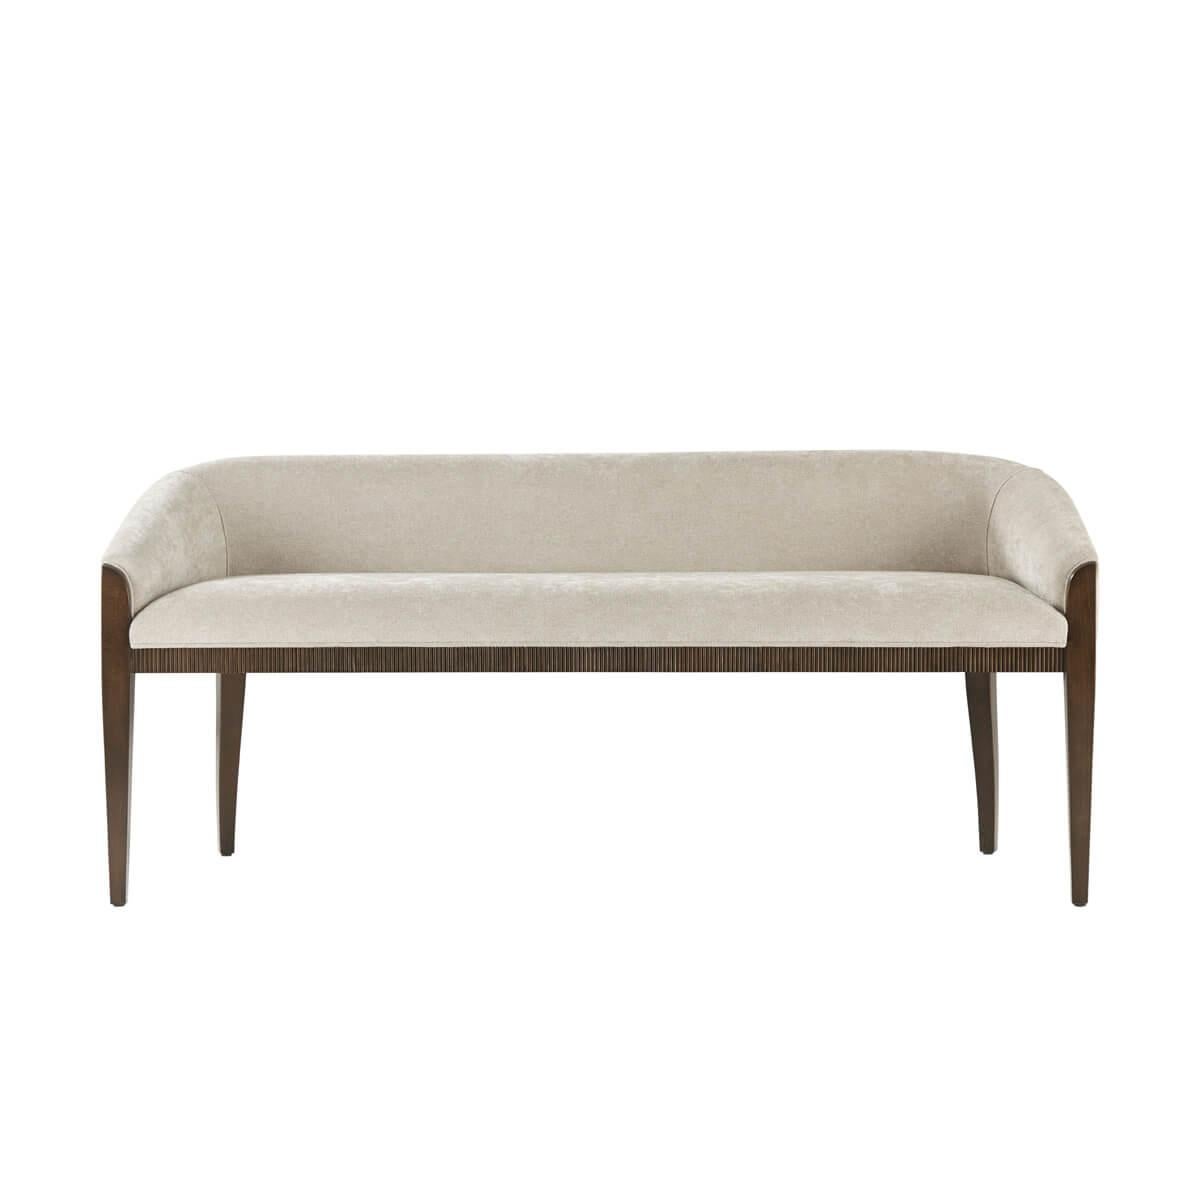 Art Deco Style Bench, a bold statement with a handsome tight back design featuring curved corners set upon a reeded carved frame and tapered legs.
Dimensions: 55